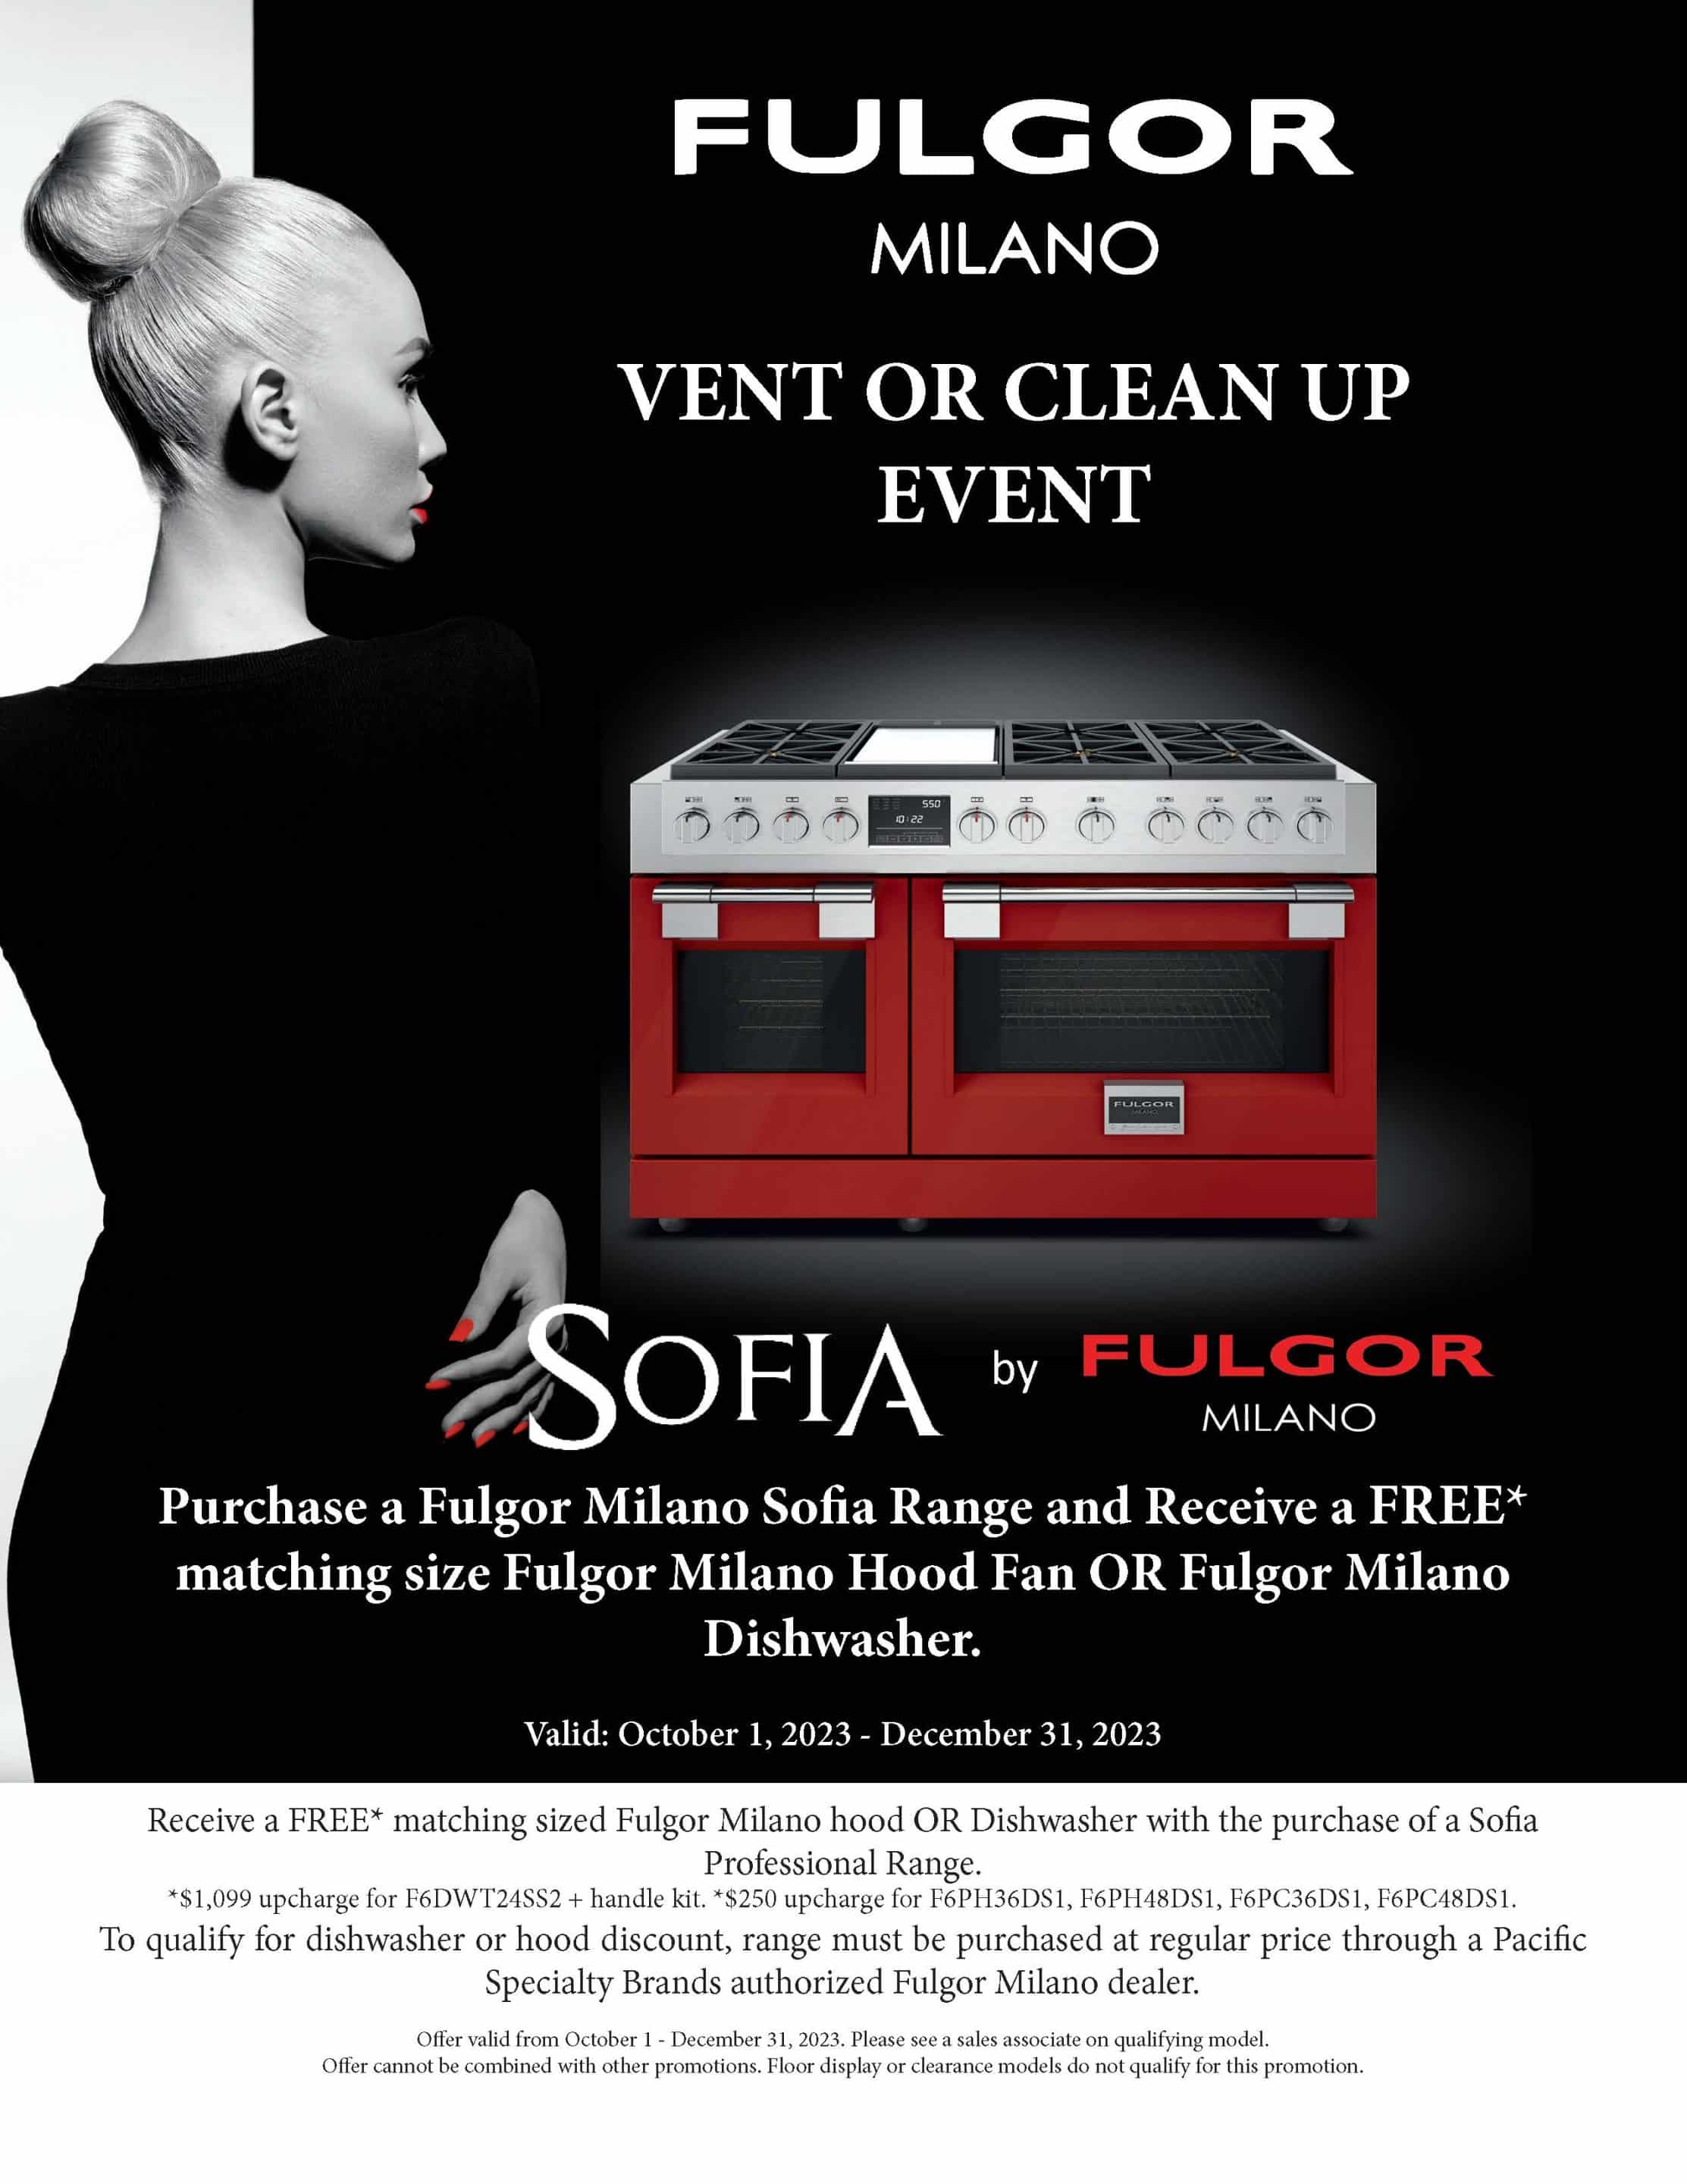 A flyer for a vent or clean up event.